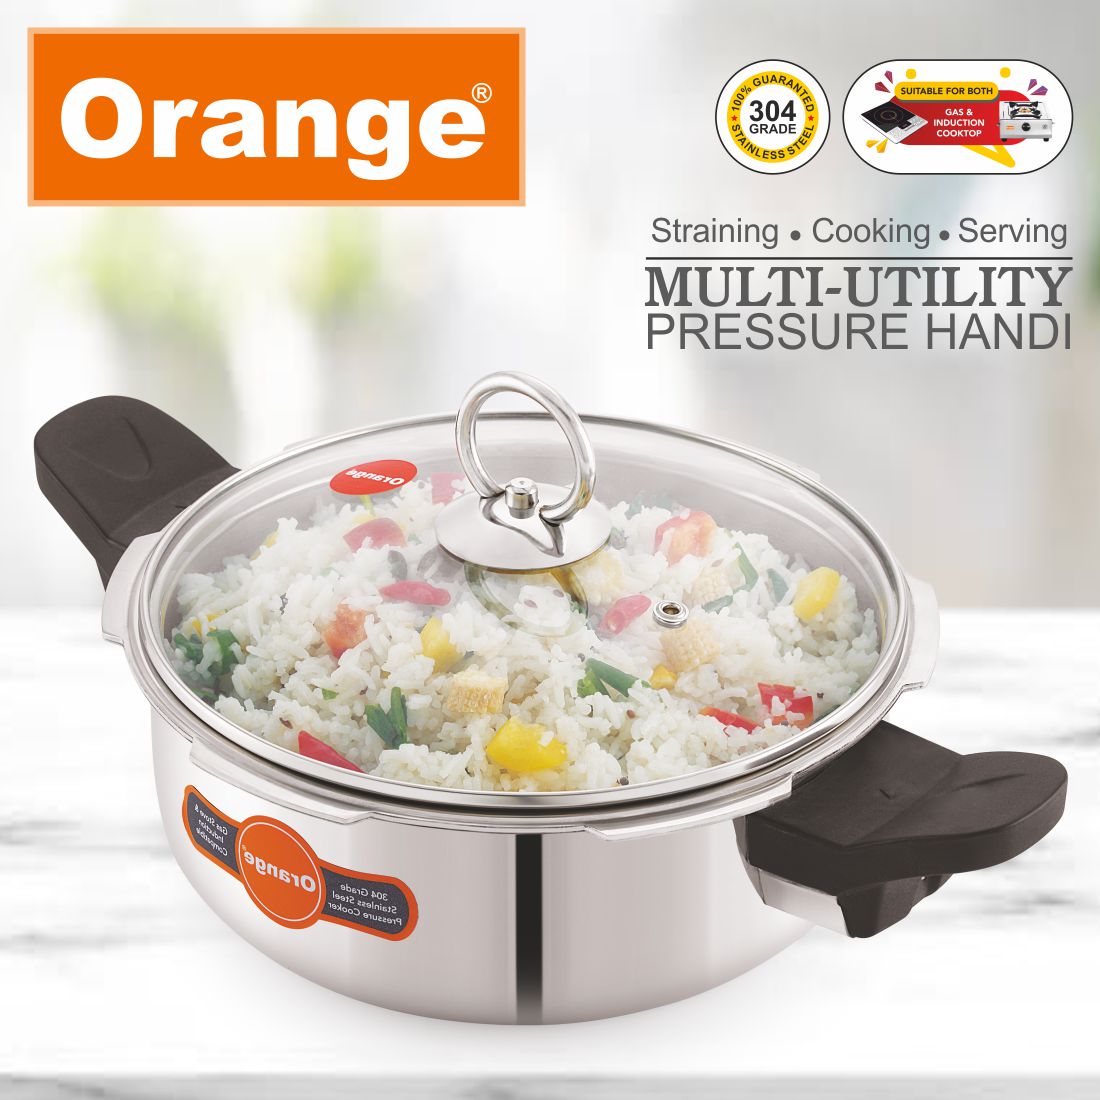 Orange Triply Stainless Steel Multi-Utility Outer lid All In One Pressure Cooker Handi